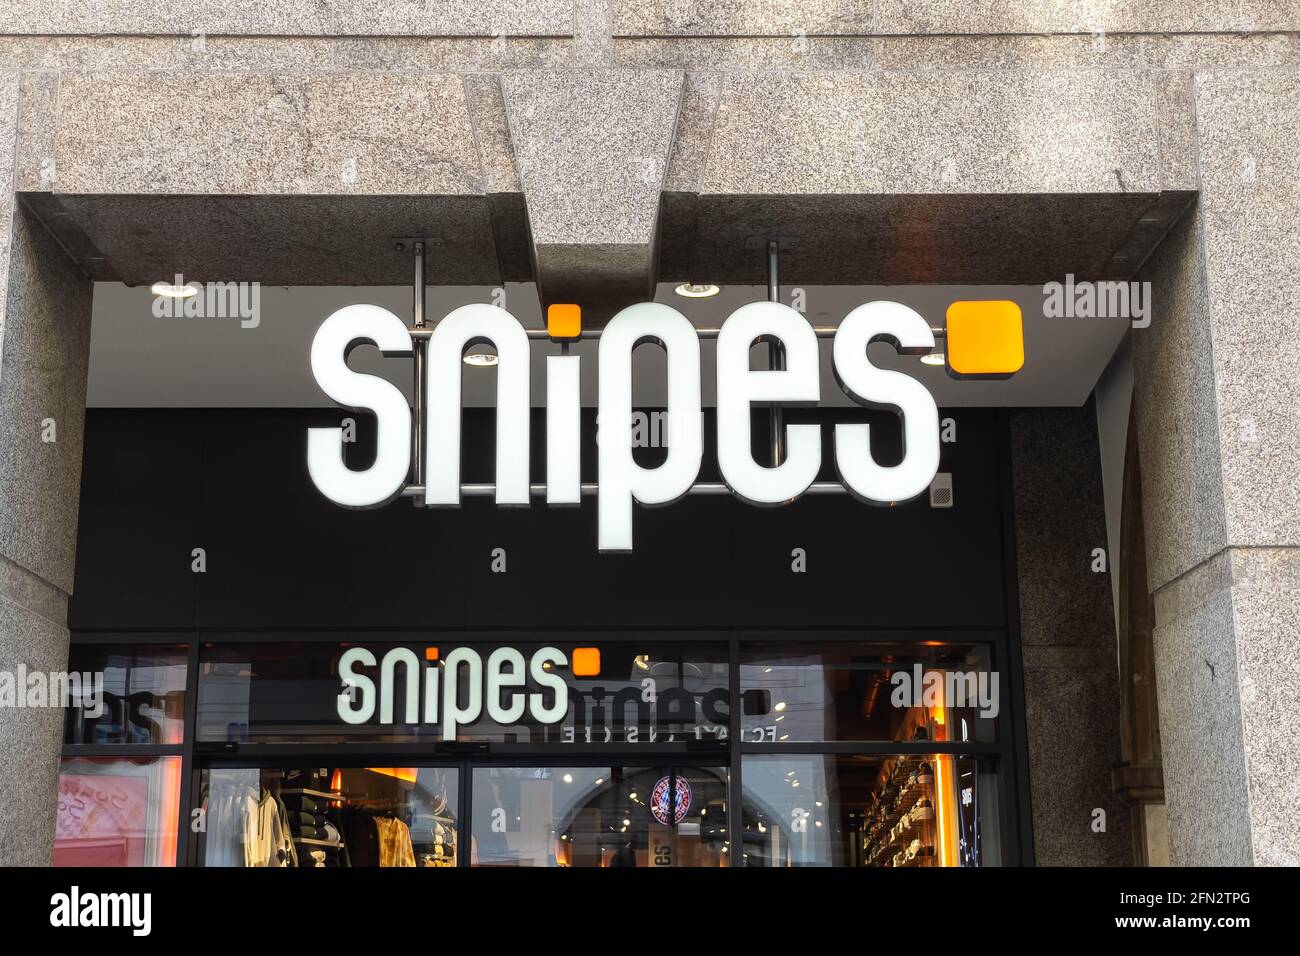 Snipes shoe store sign in Munich Stock Photo